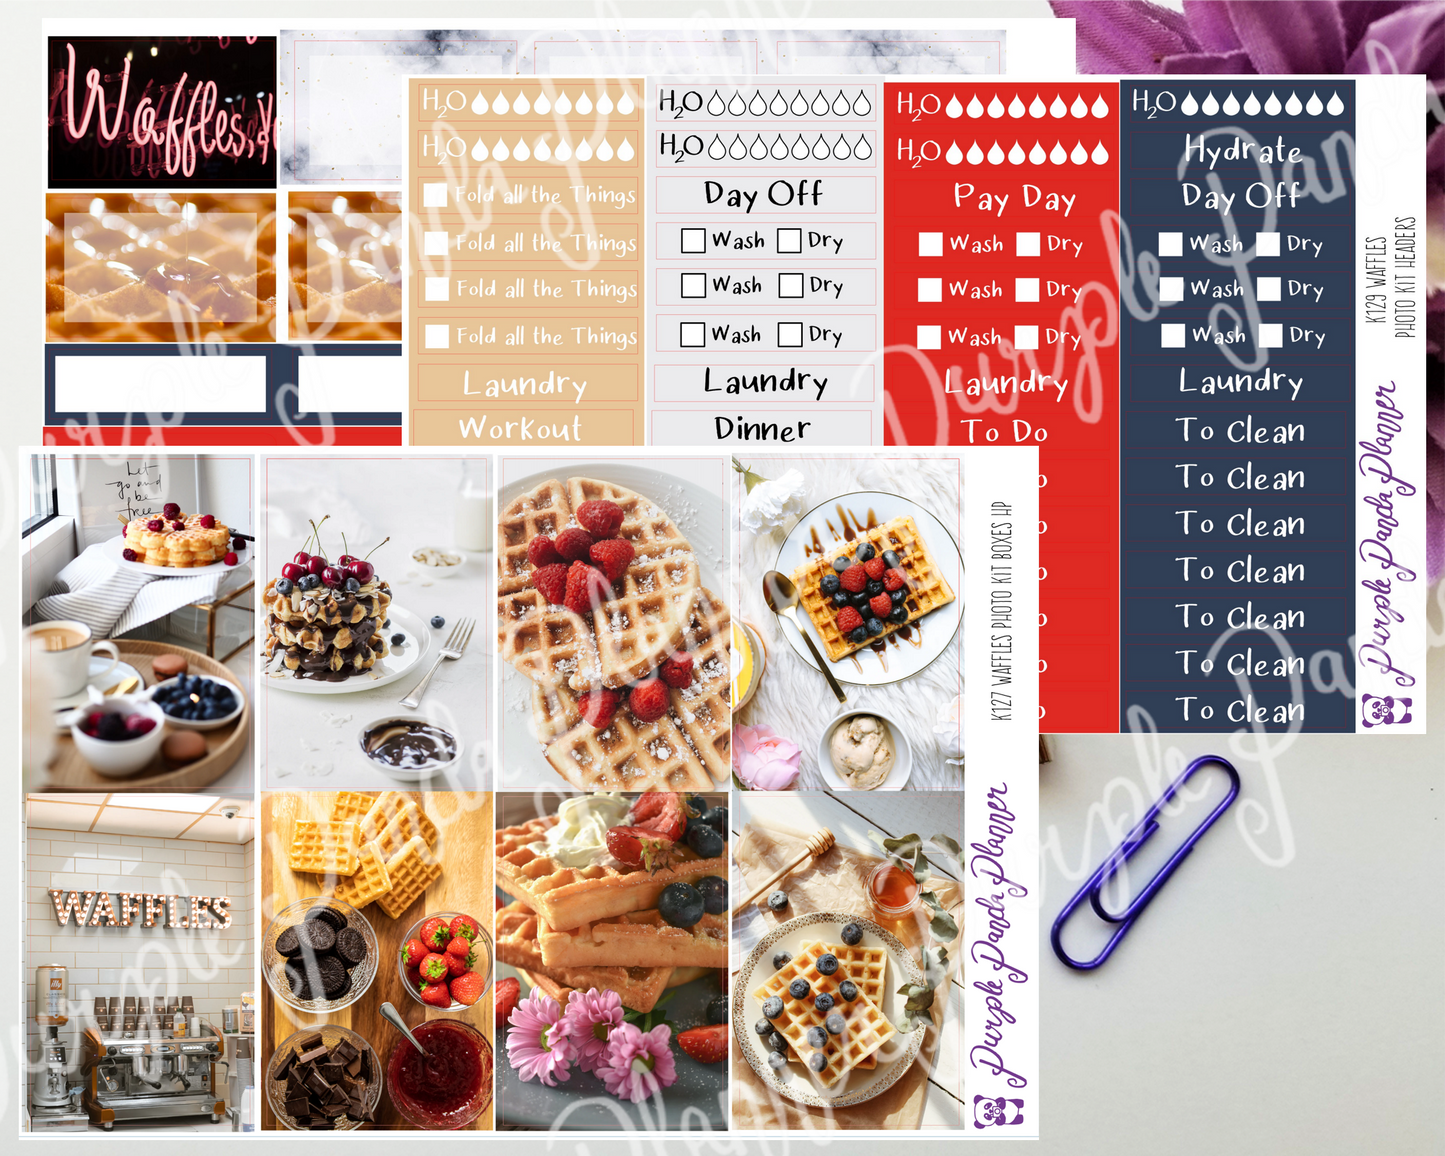 HP Classic - Waffles Weekly Photo Kit for Planner or Bullet Journal, Functional Stickers (K111)